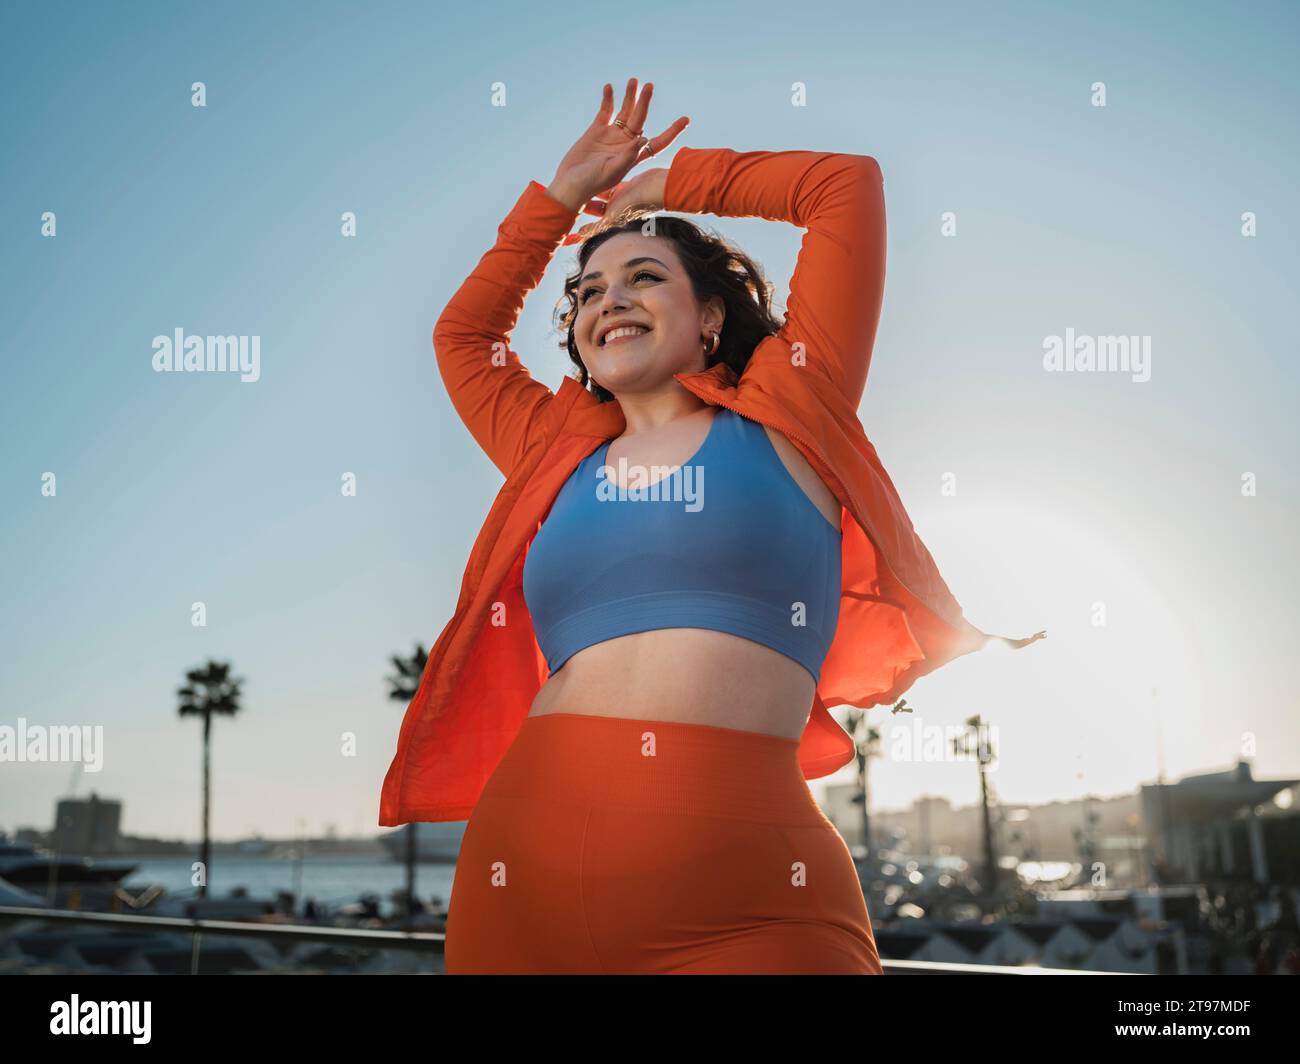 Happy woman in sports clothing standing with arms raised under sky Stock Photo